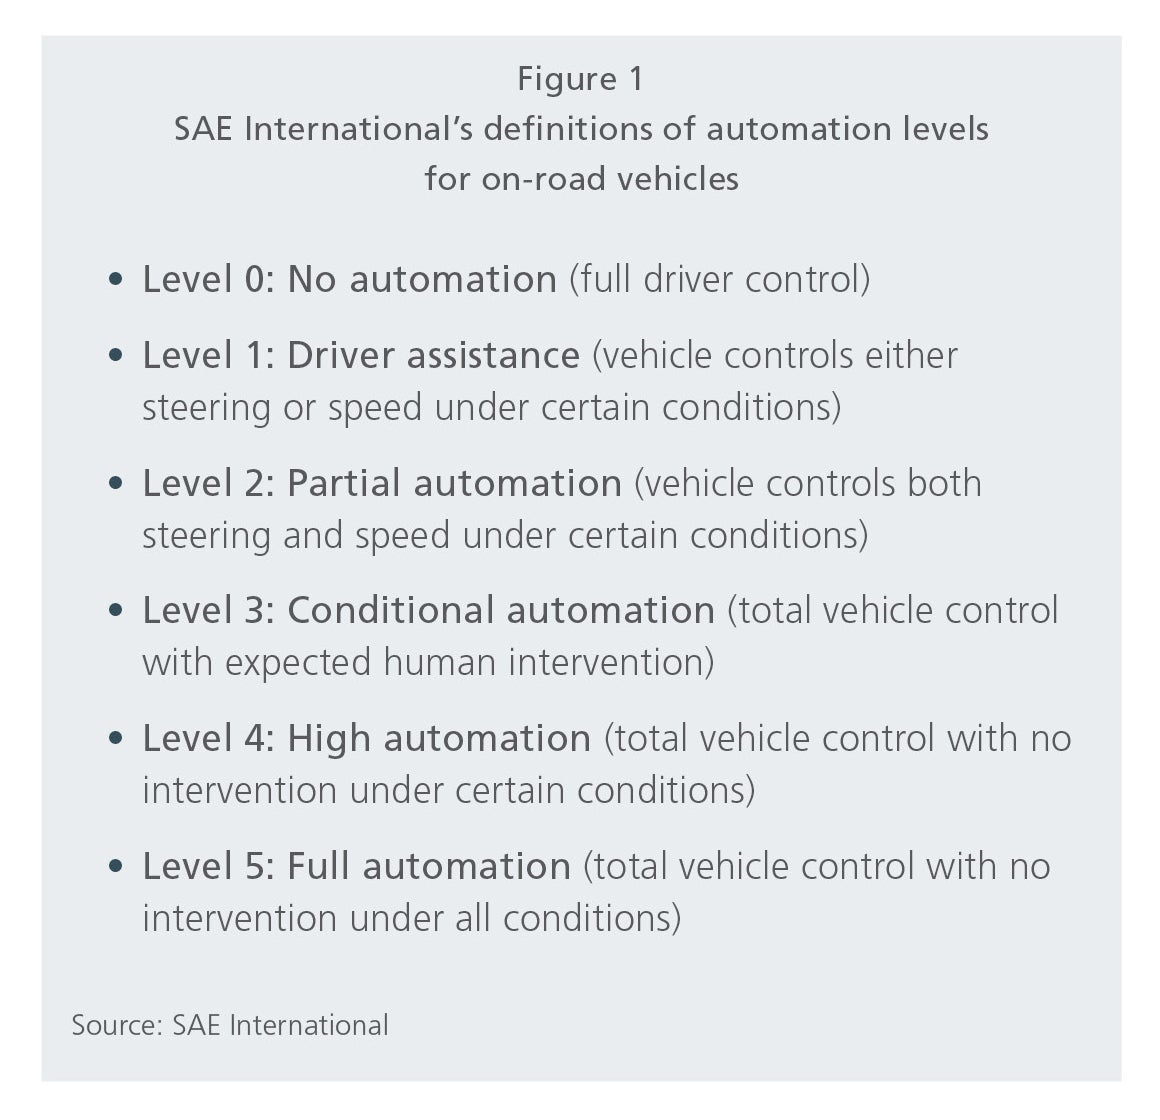 SAE International’s definitions of automation levels for on-road vehicles